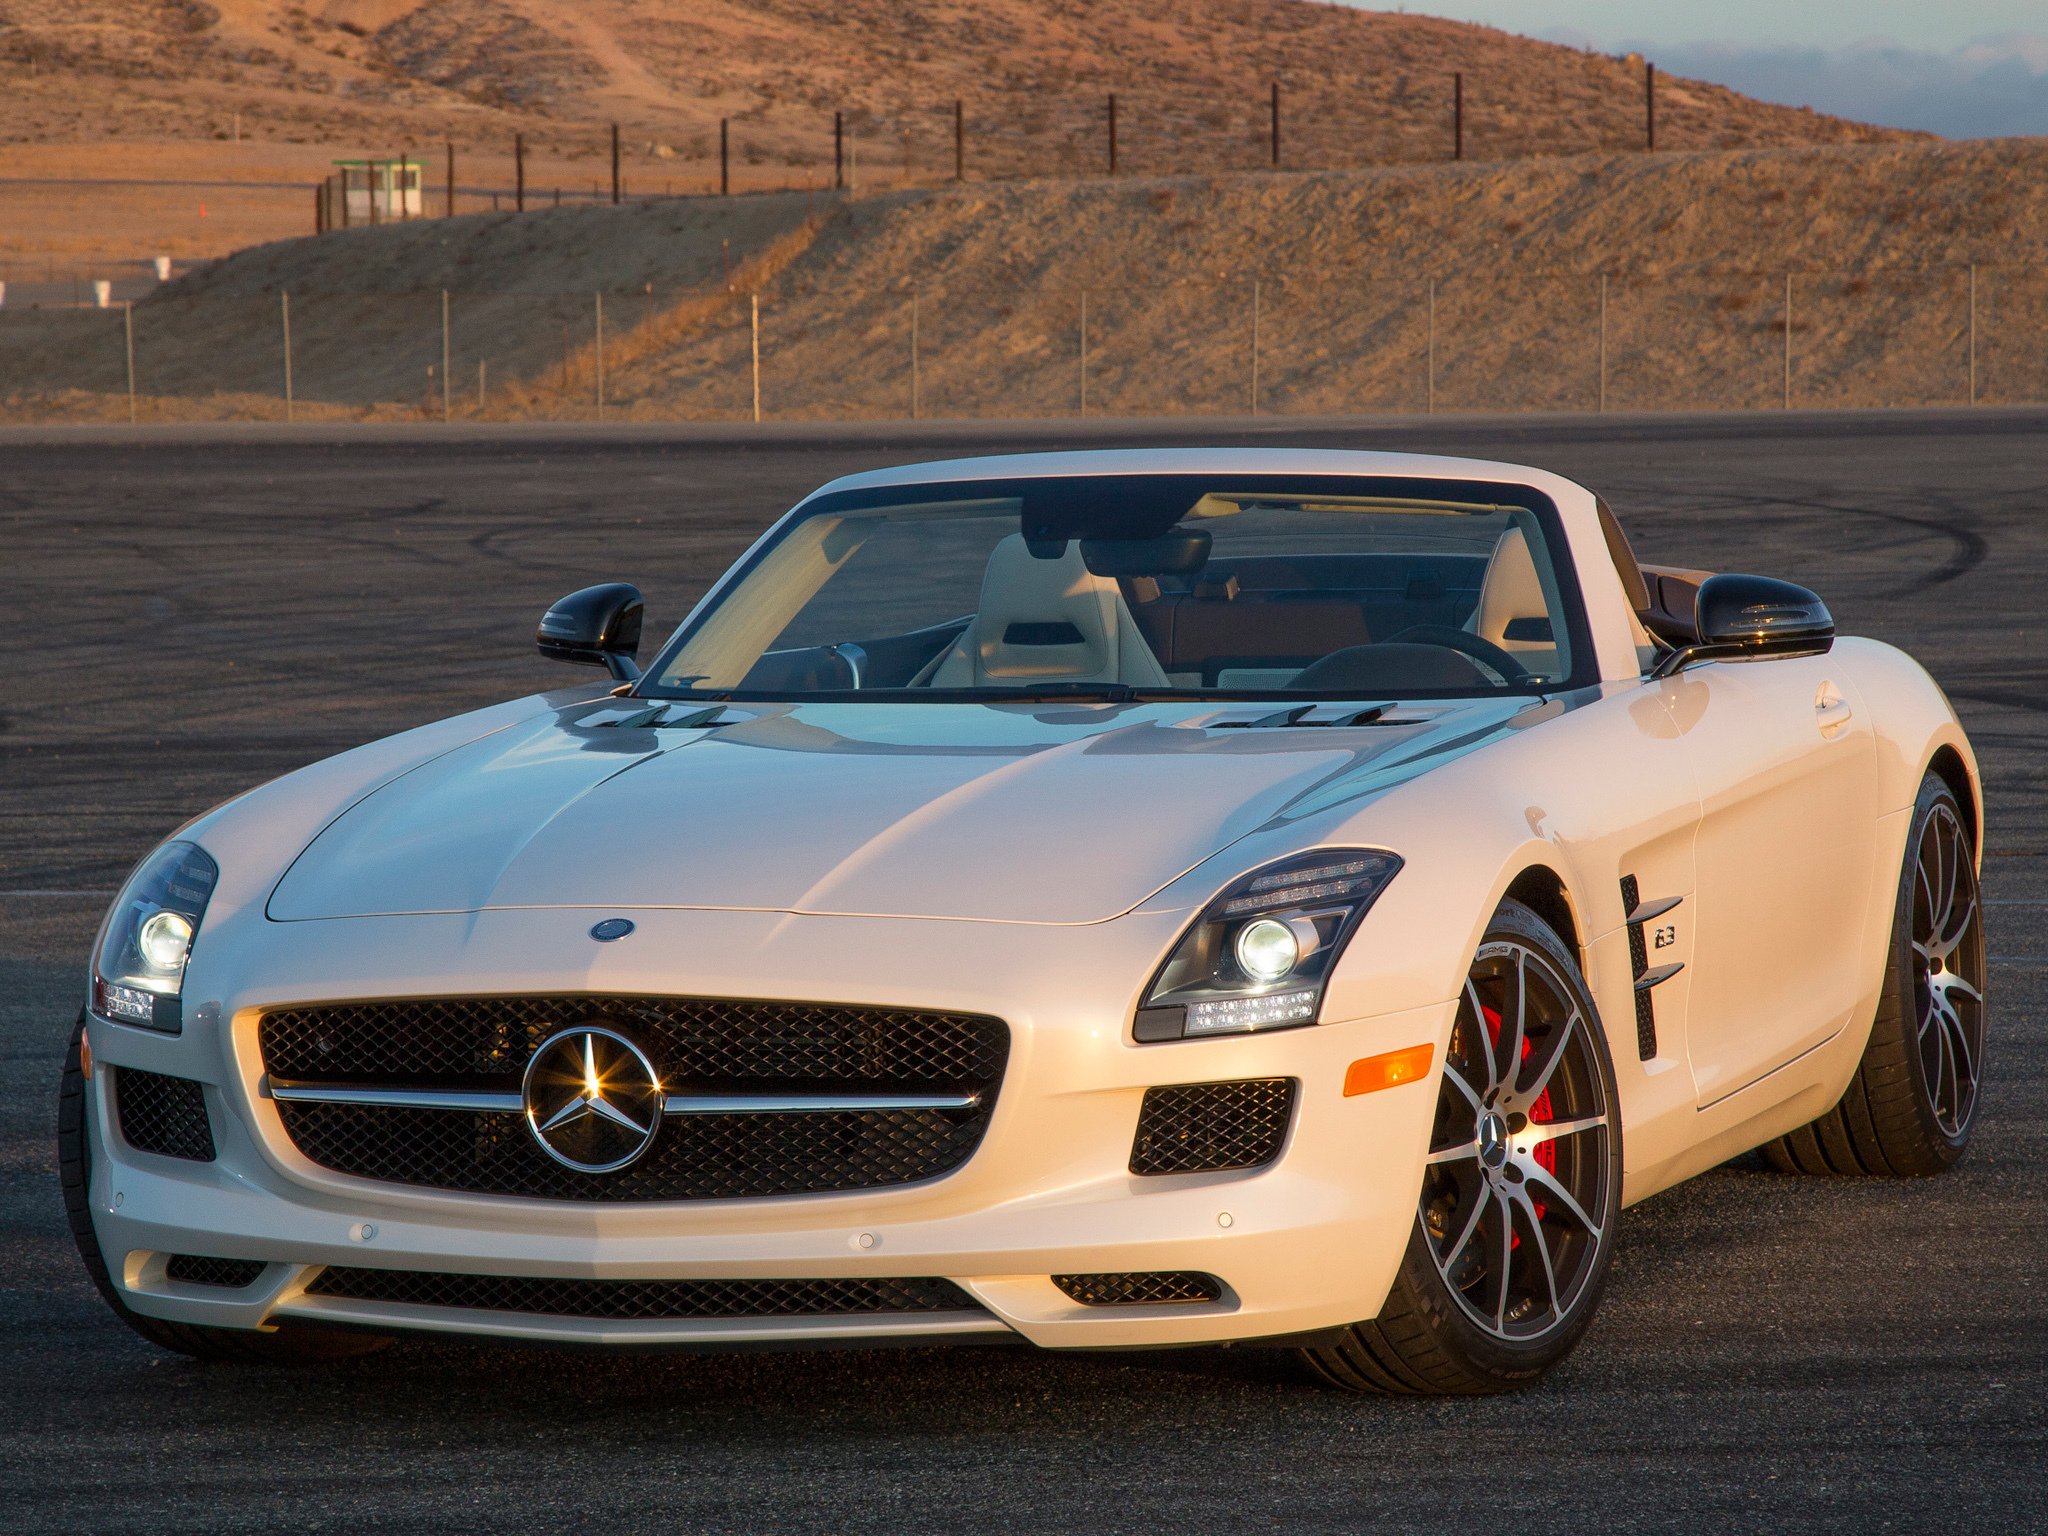 sls, cars, white, side view, amg, mercedes benz, cabriolet, gt, 63